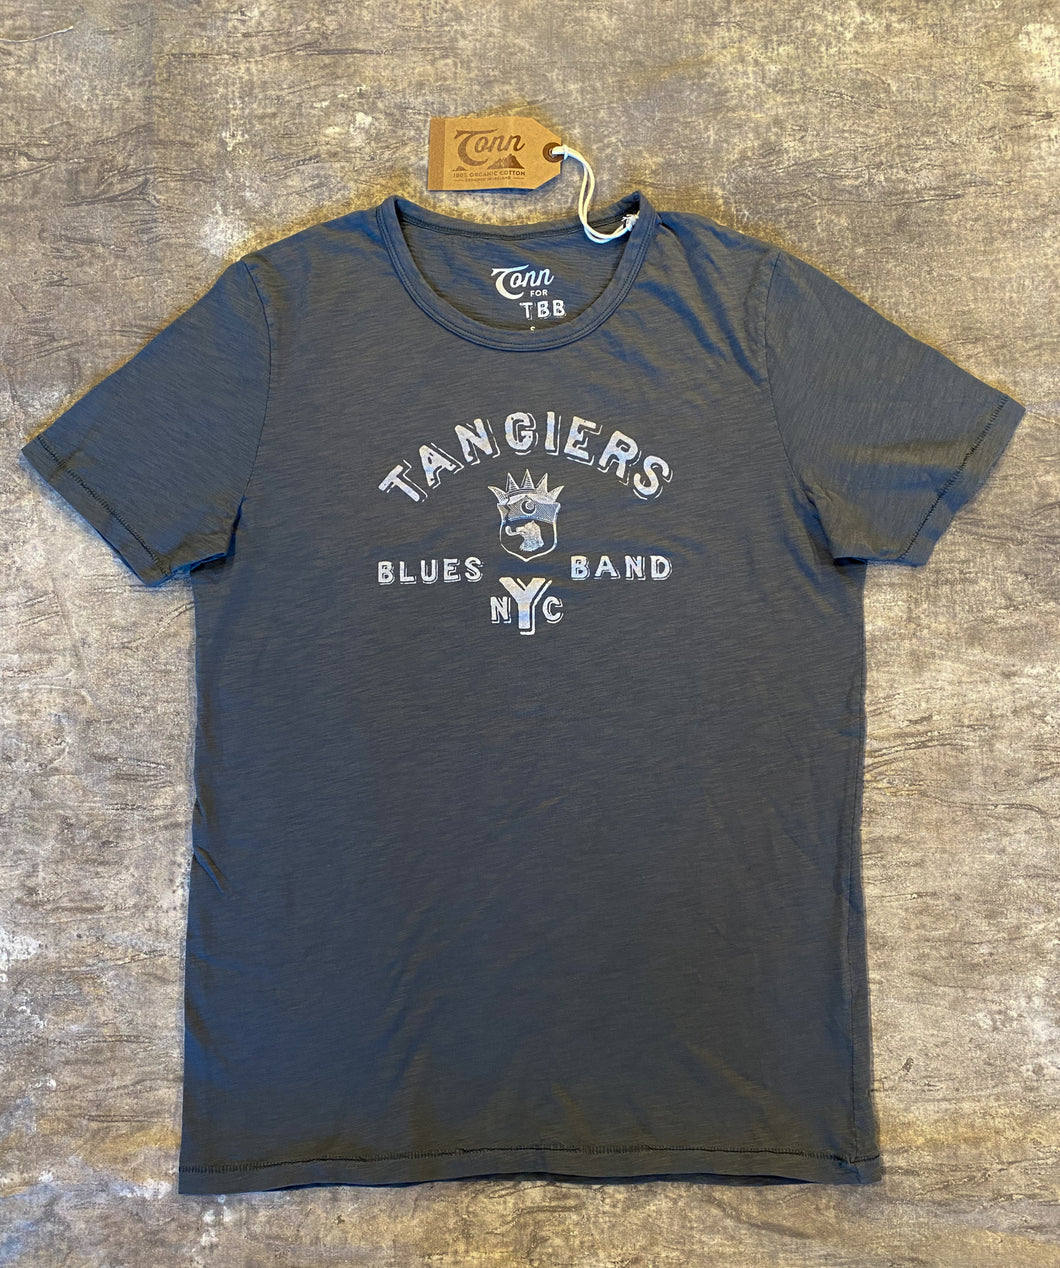 Tangiers Blues Band Tee from Tonn Surf and Danny Clinch - Transparent Clinch Gallery